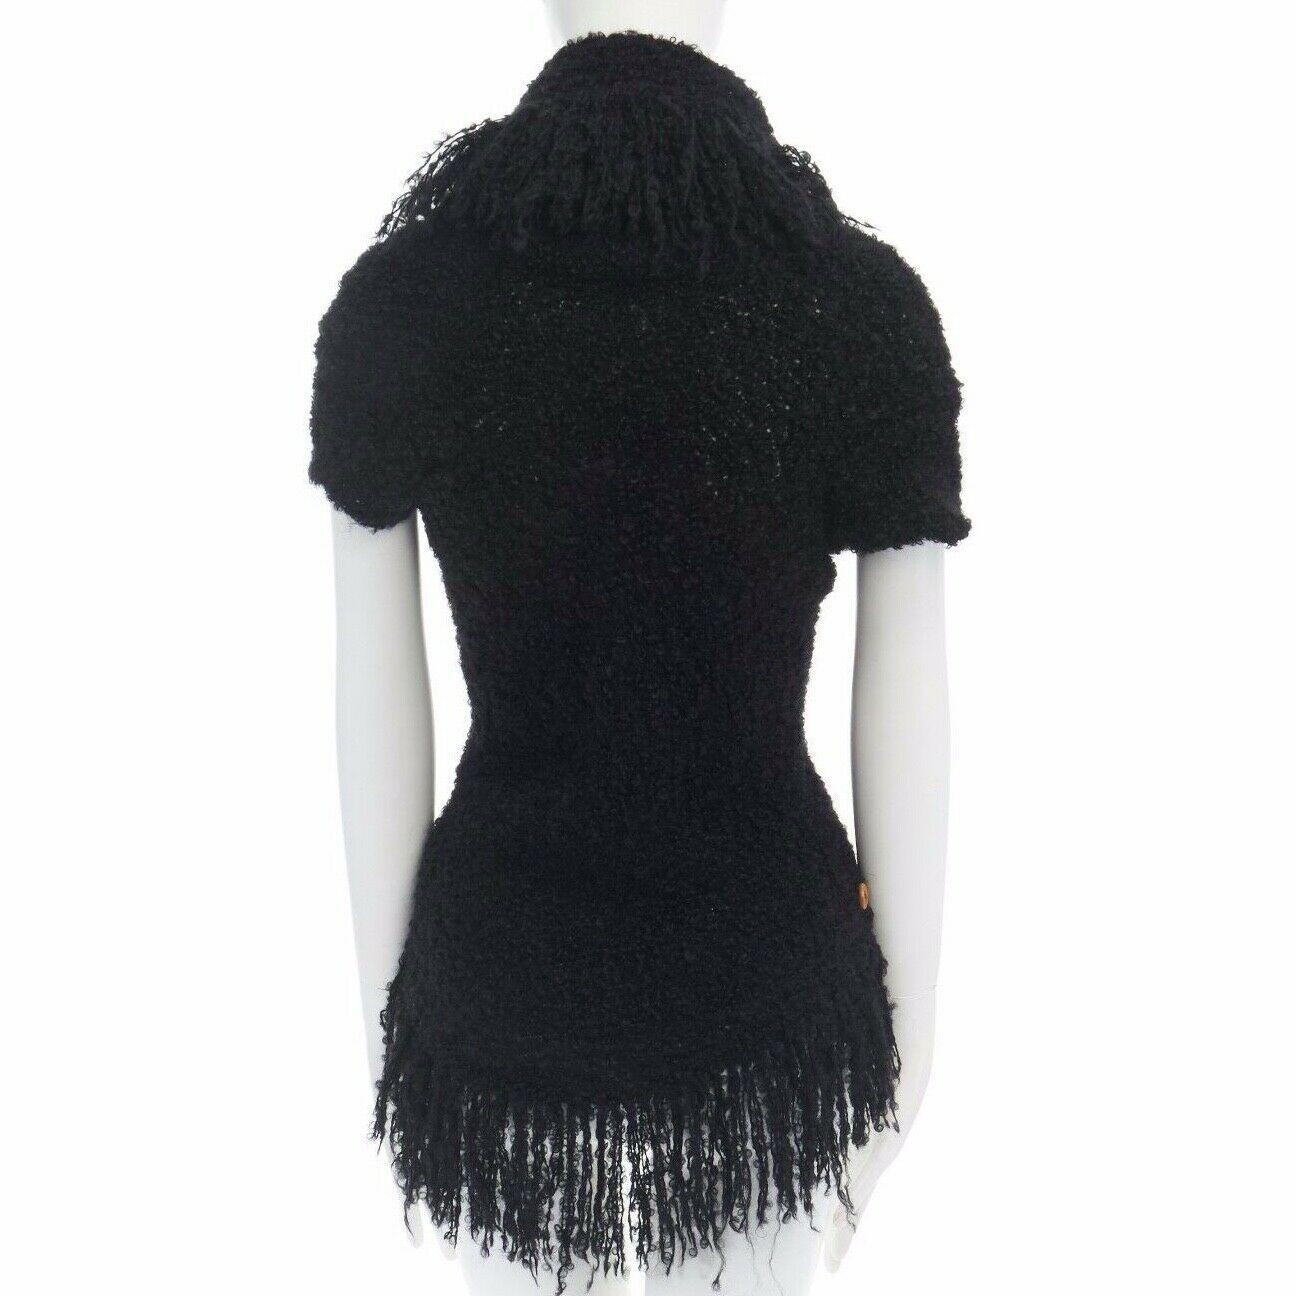 runway COMME DES GARCONS AW02 black mohair fringe trimmed circle cut cardigan

COMME DES GARCONS
FROM THE FALL WINTER 2002 COLLECTION
Mohair, wool, nylon. Knitted. Fringe trimmed. Button front closure. 
Long sleeve. It becomes a circle when laid